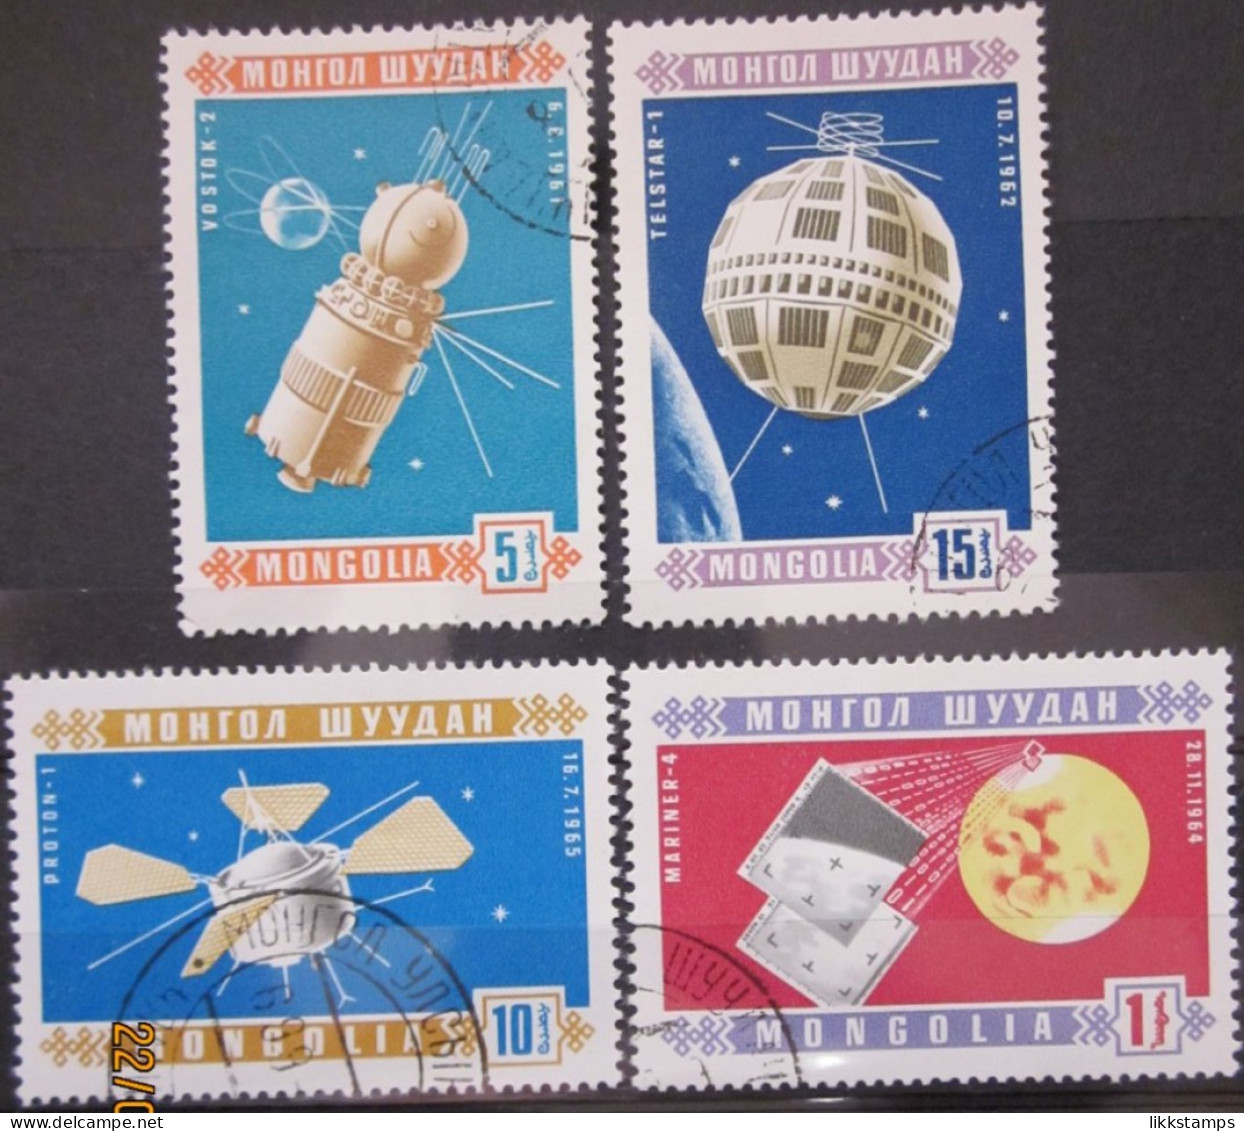 MONGOLIA ~ 1966 ~ S.G. NUMBERS 428 - 430 + 435, ~ SPACE SATELLITES. ~ VFU #03469 - Mongolie